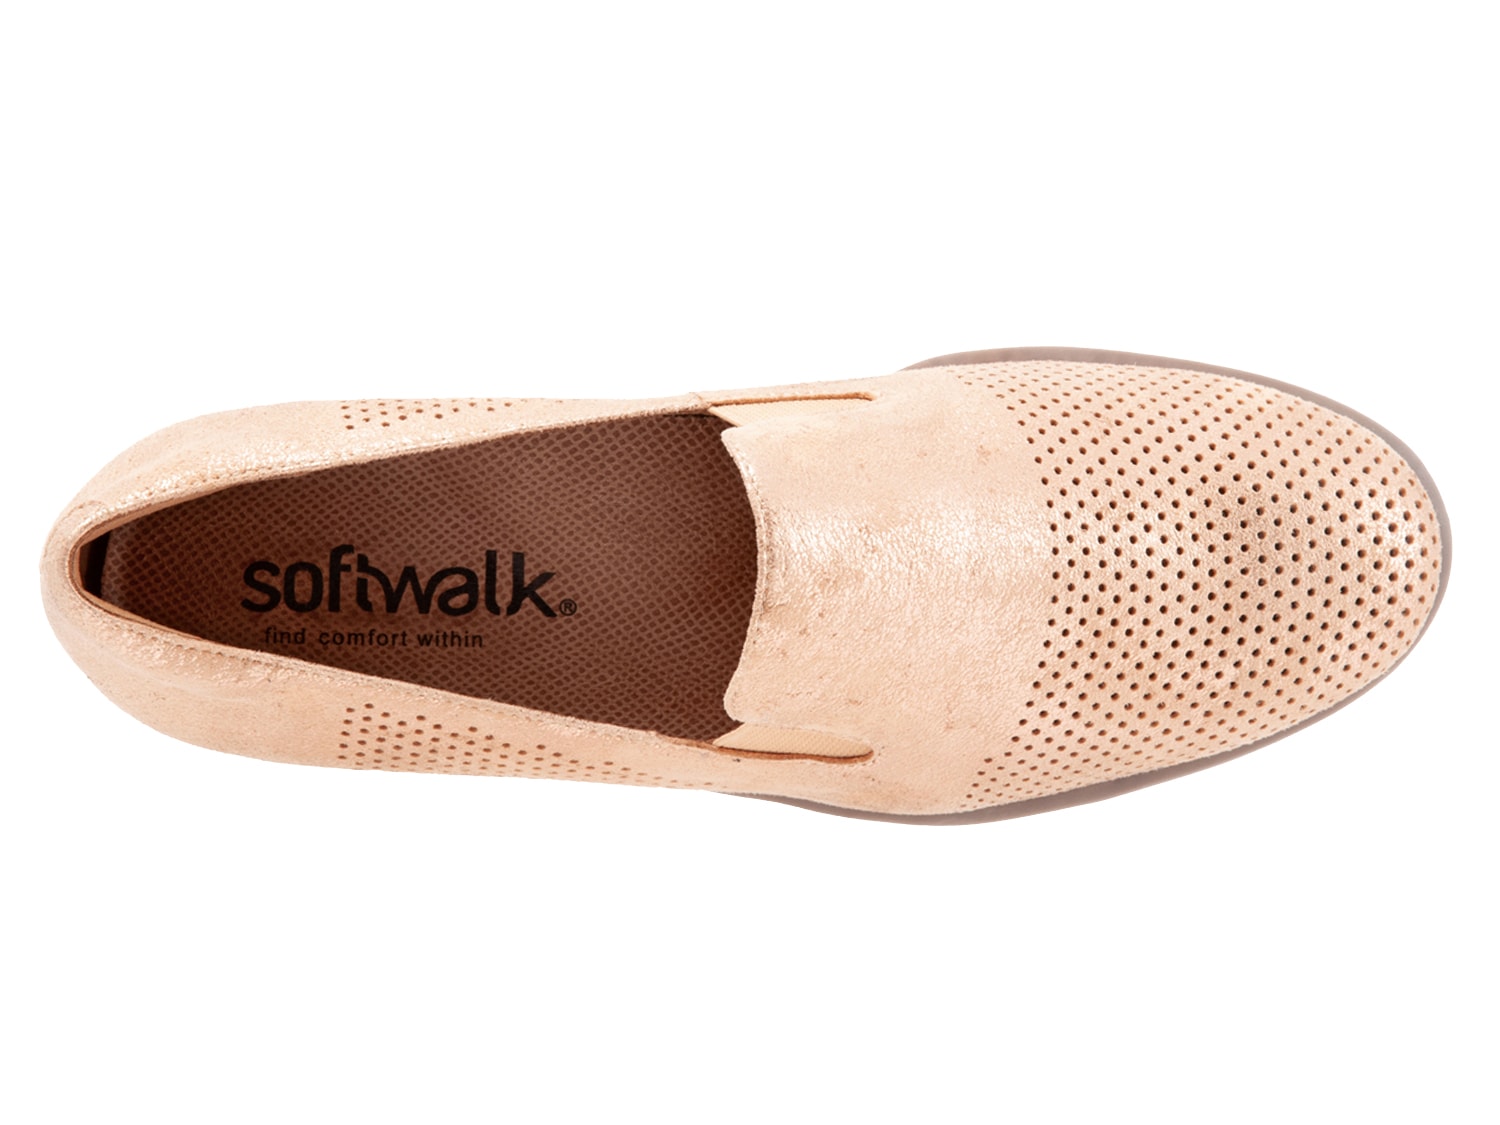 softwalk whistle wedge loafer